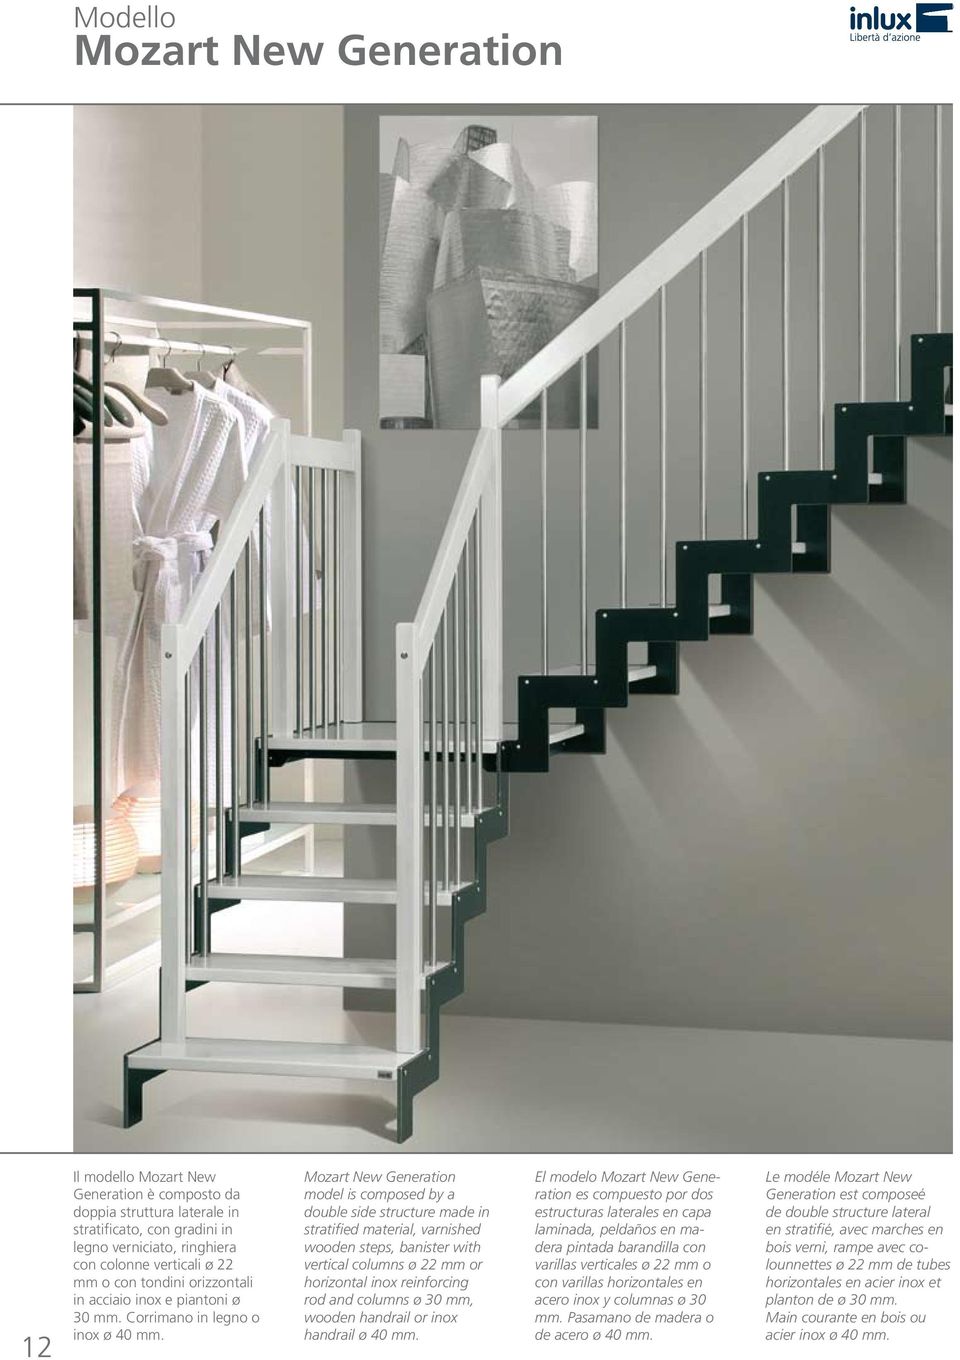 Mozart New Generation model is composed by a double side structure made in stratified material, varnished wooden steps, banister with vertical columns ø 22 mm or horizontal inox reinforcing rod and